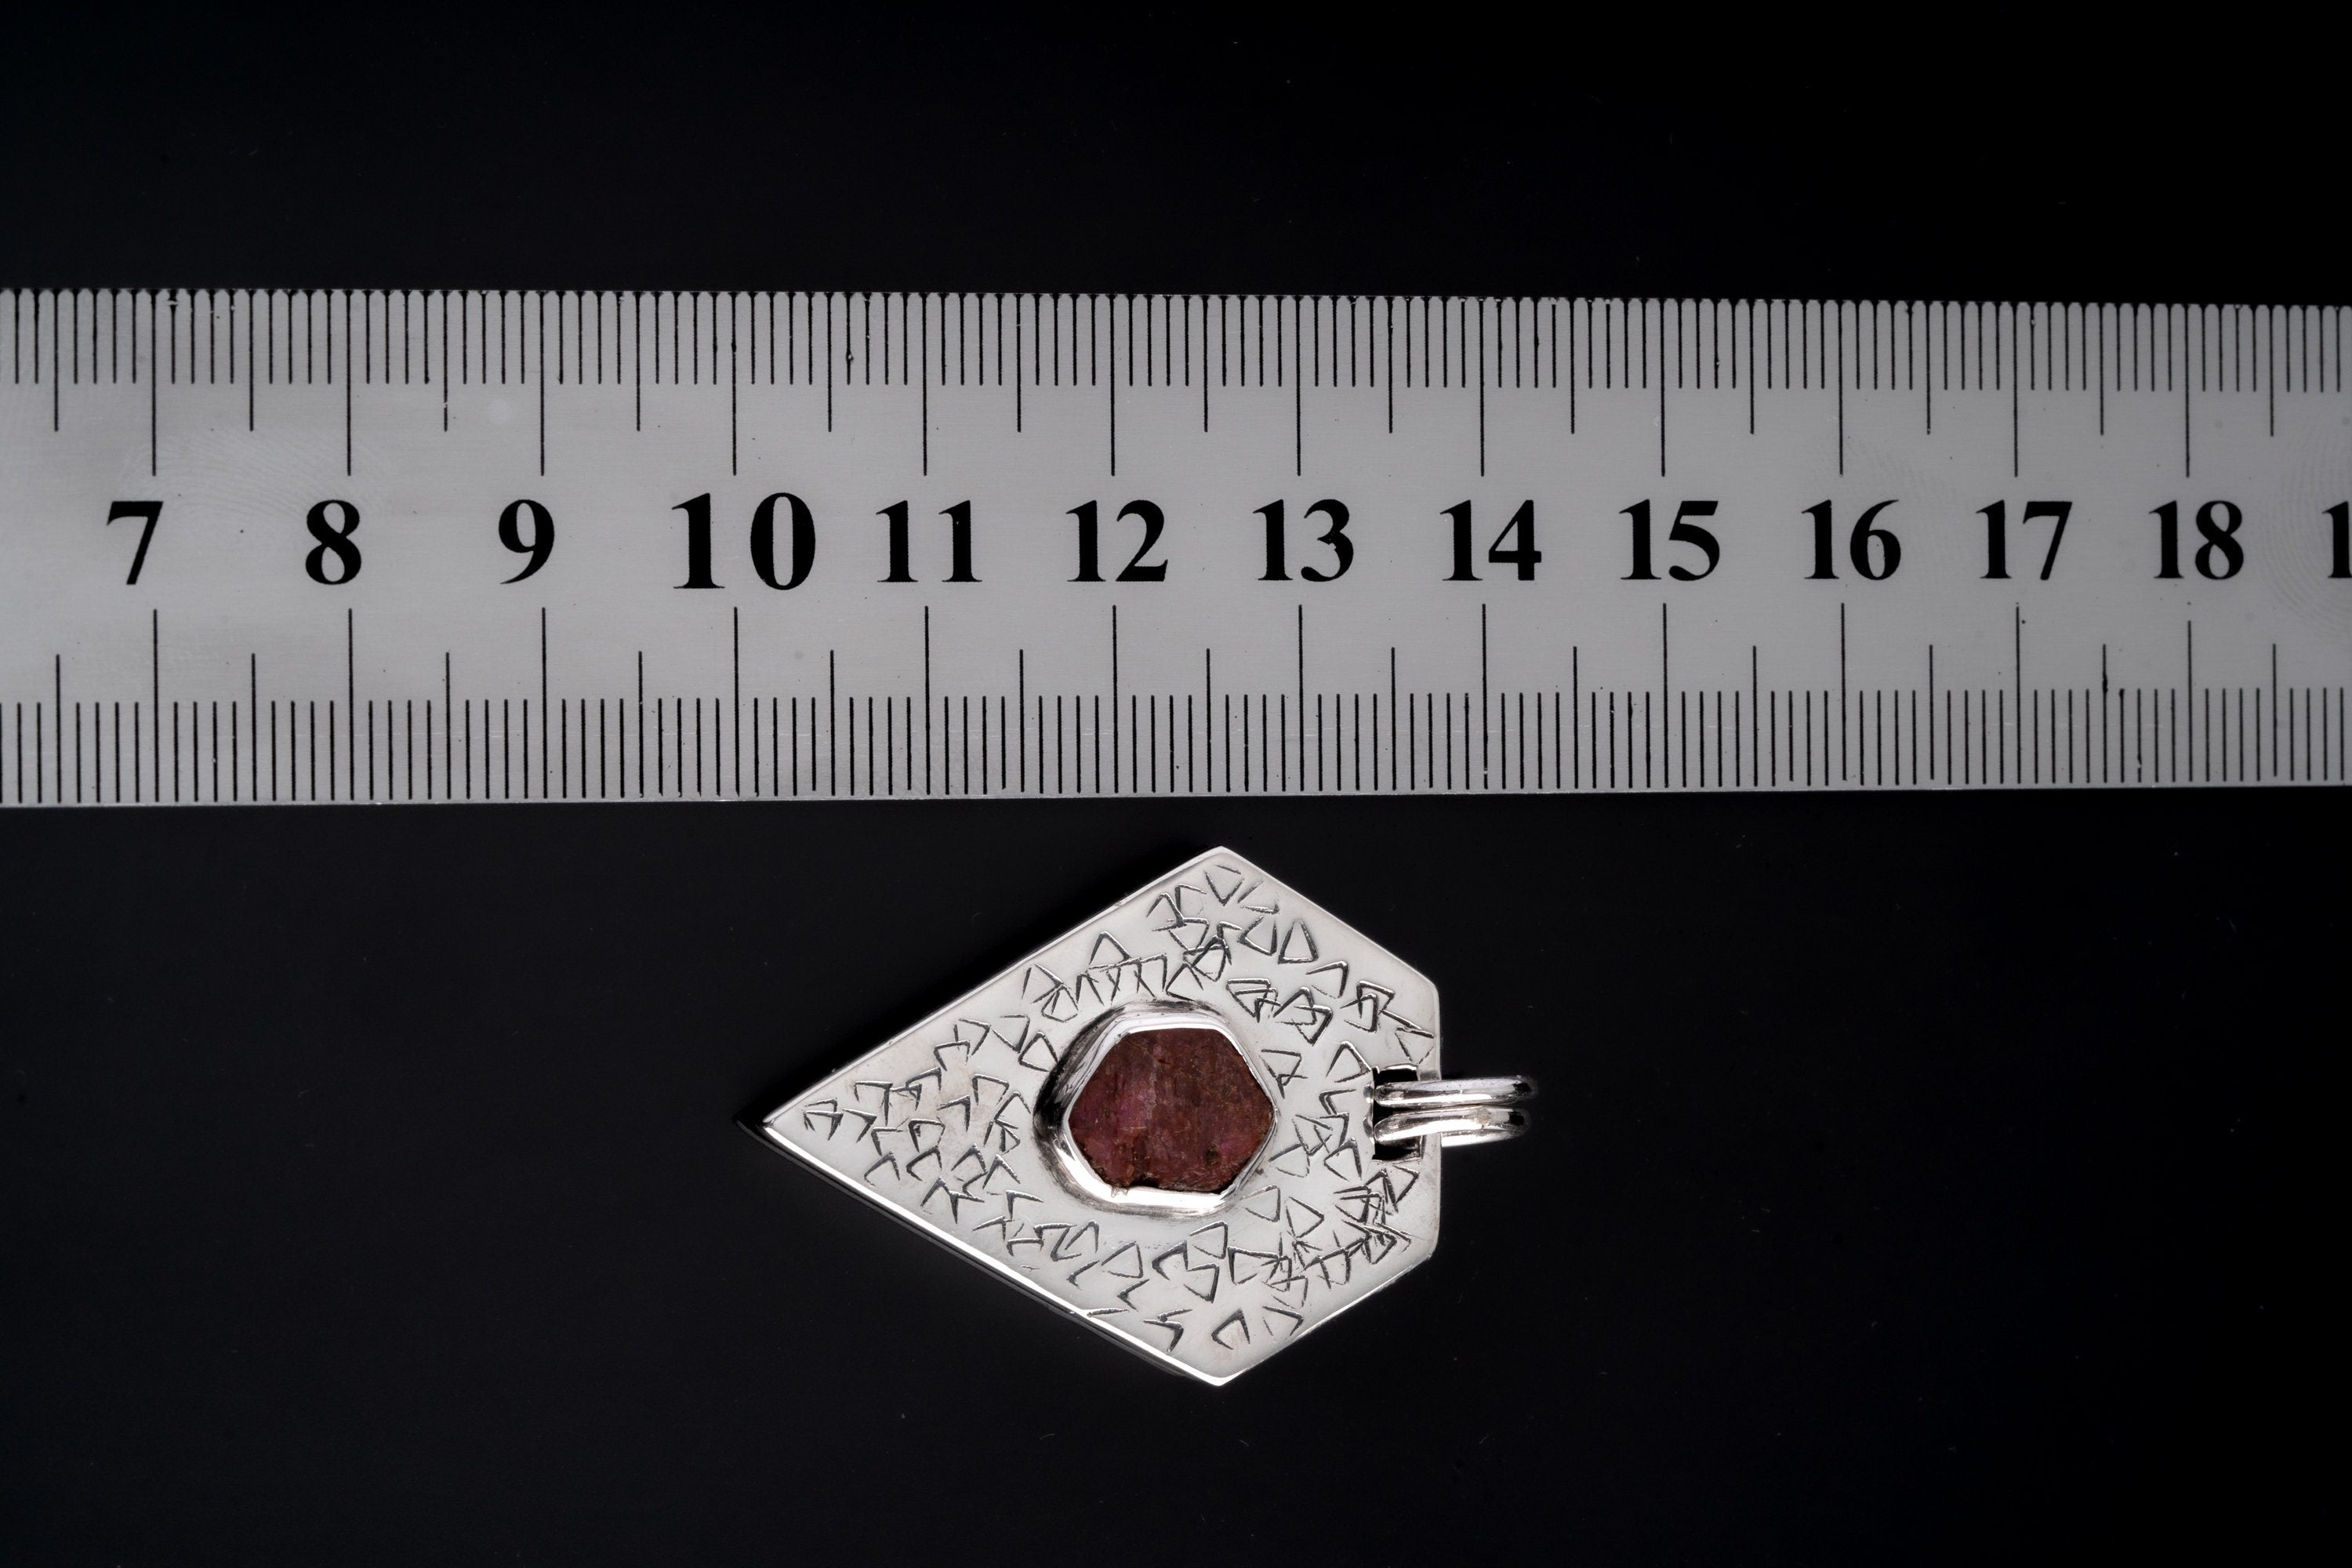 Geometric Gemmy Record Keeper Ruby Muse - Sterling Silver Pendant - Textured & Shiny Finished